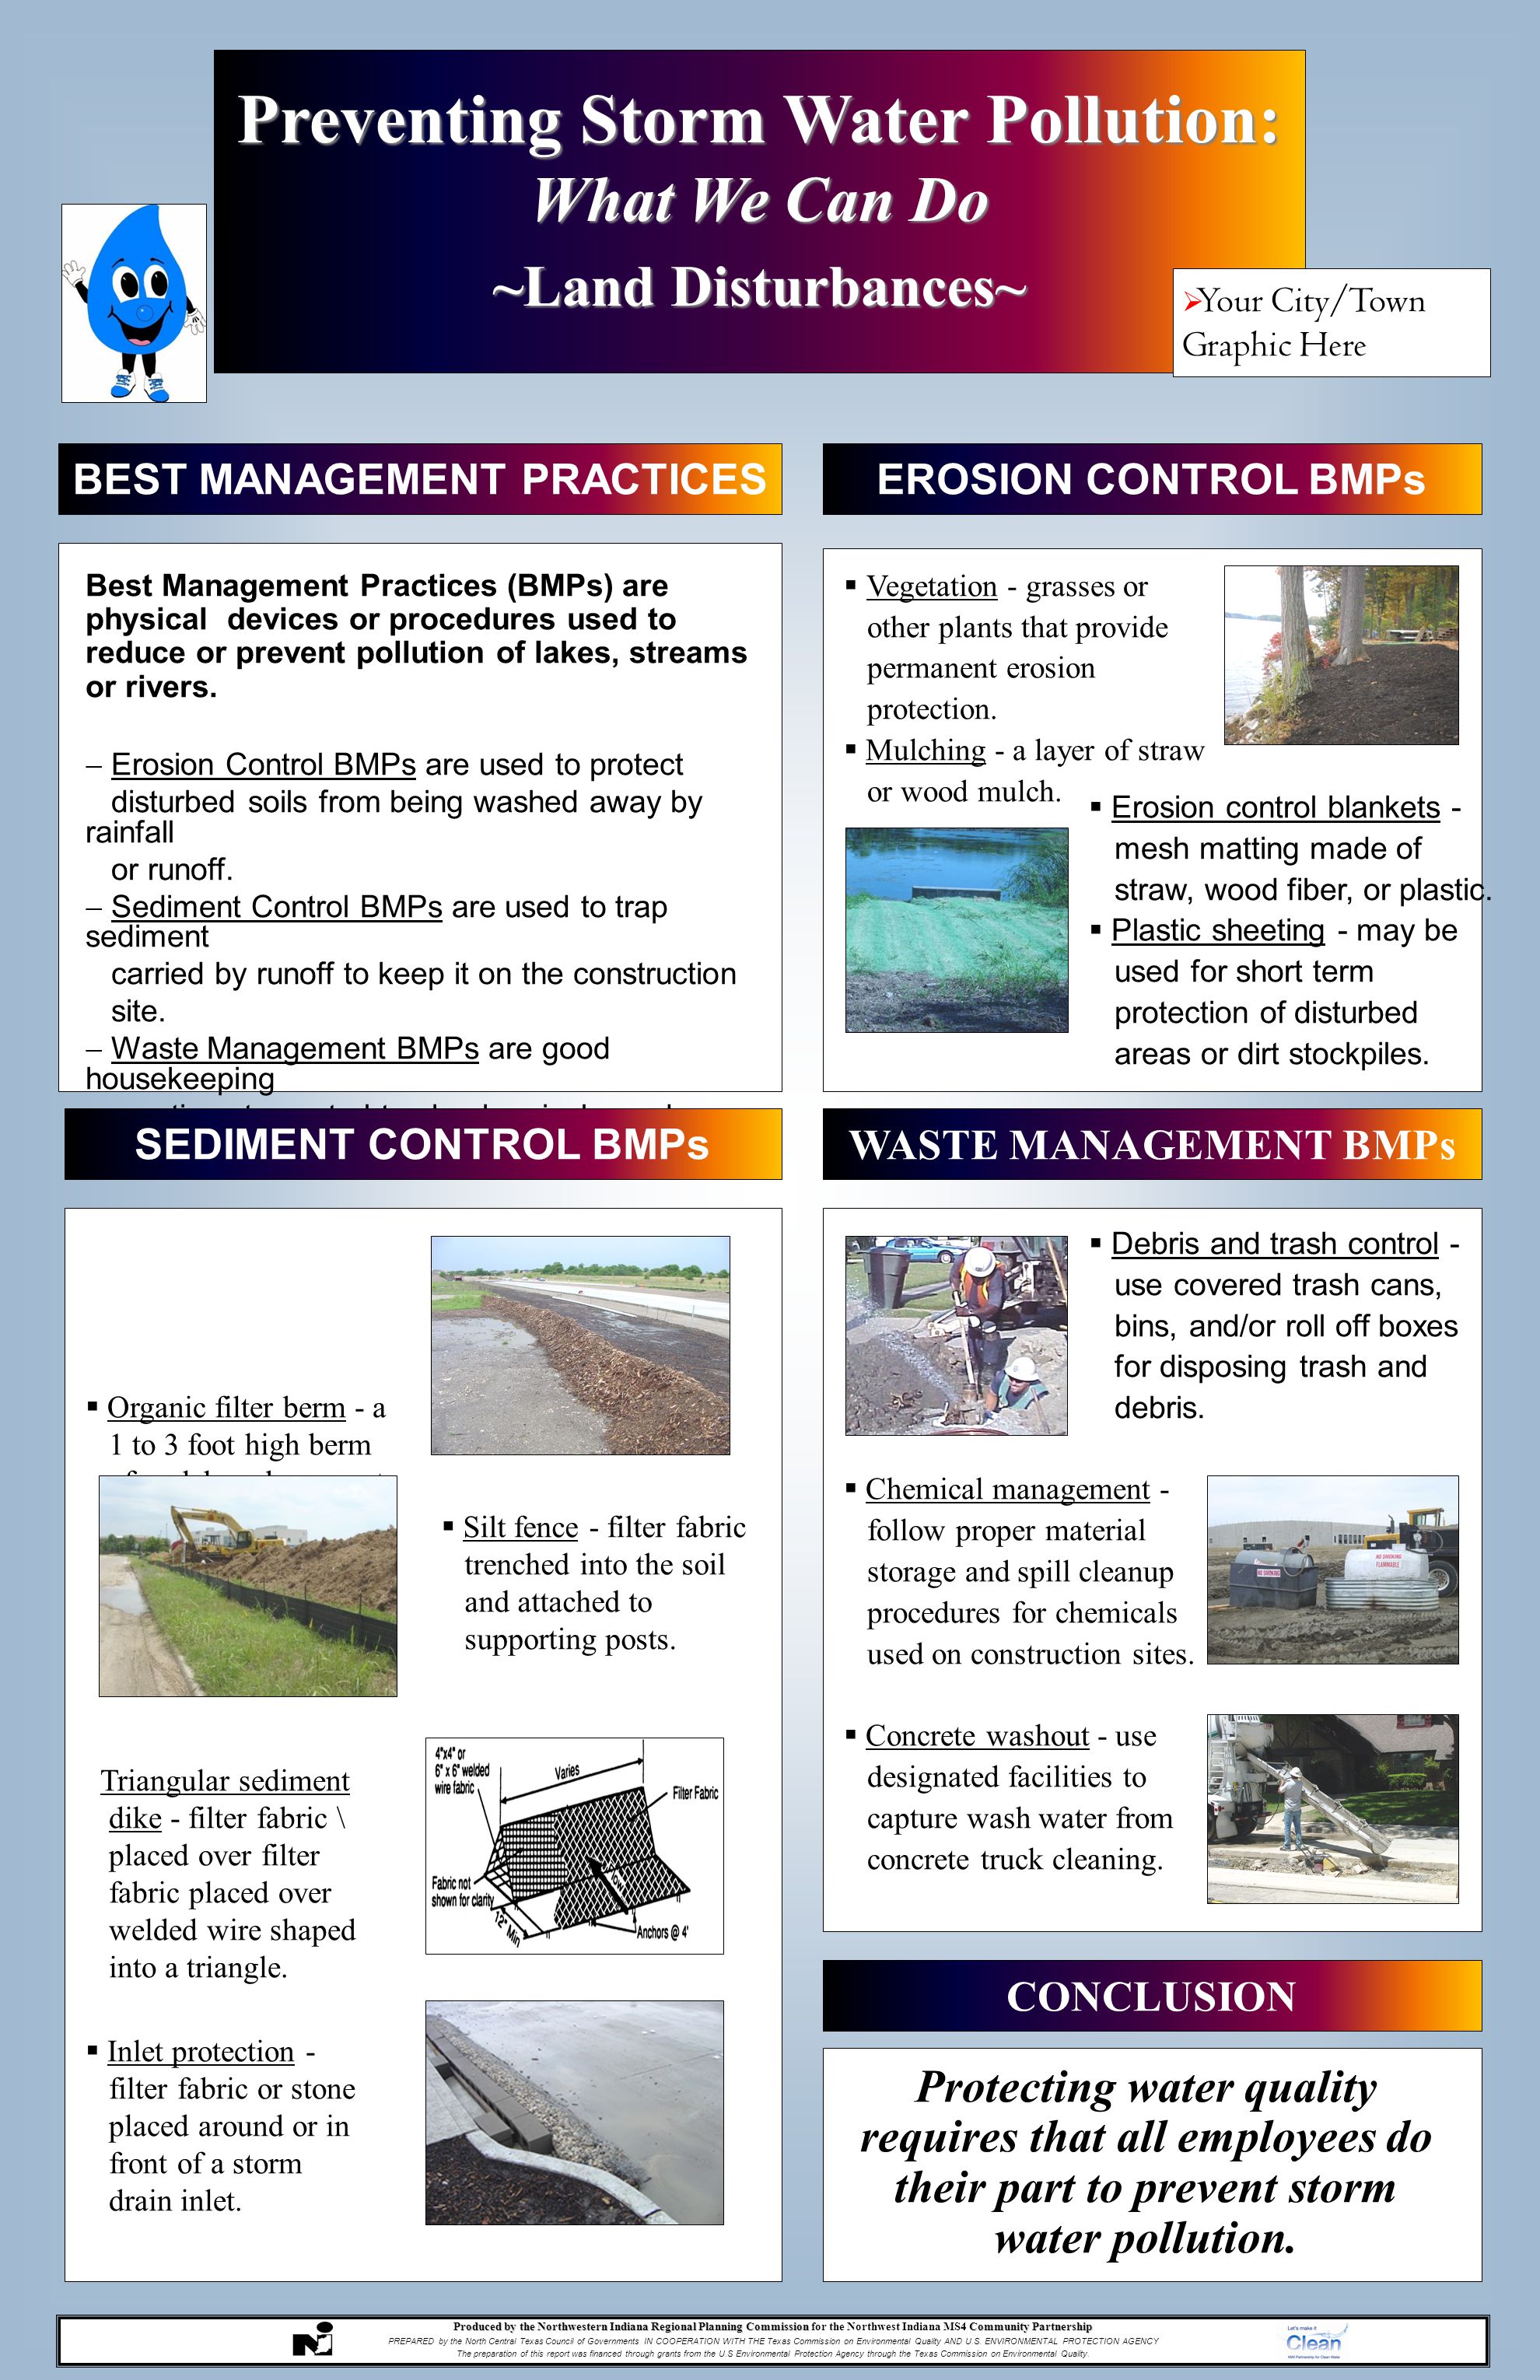 Best Management Practices (BMPs) are physical devices or procedures used to reduce or prevent pollution of lakes, streams or rivers.